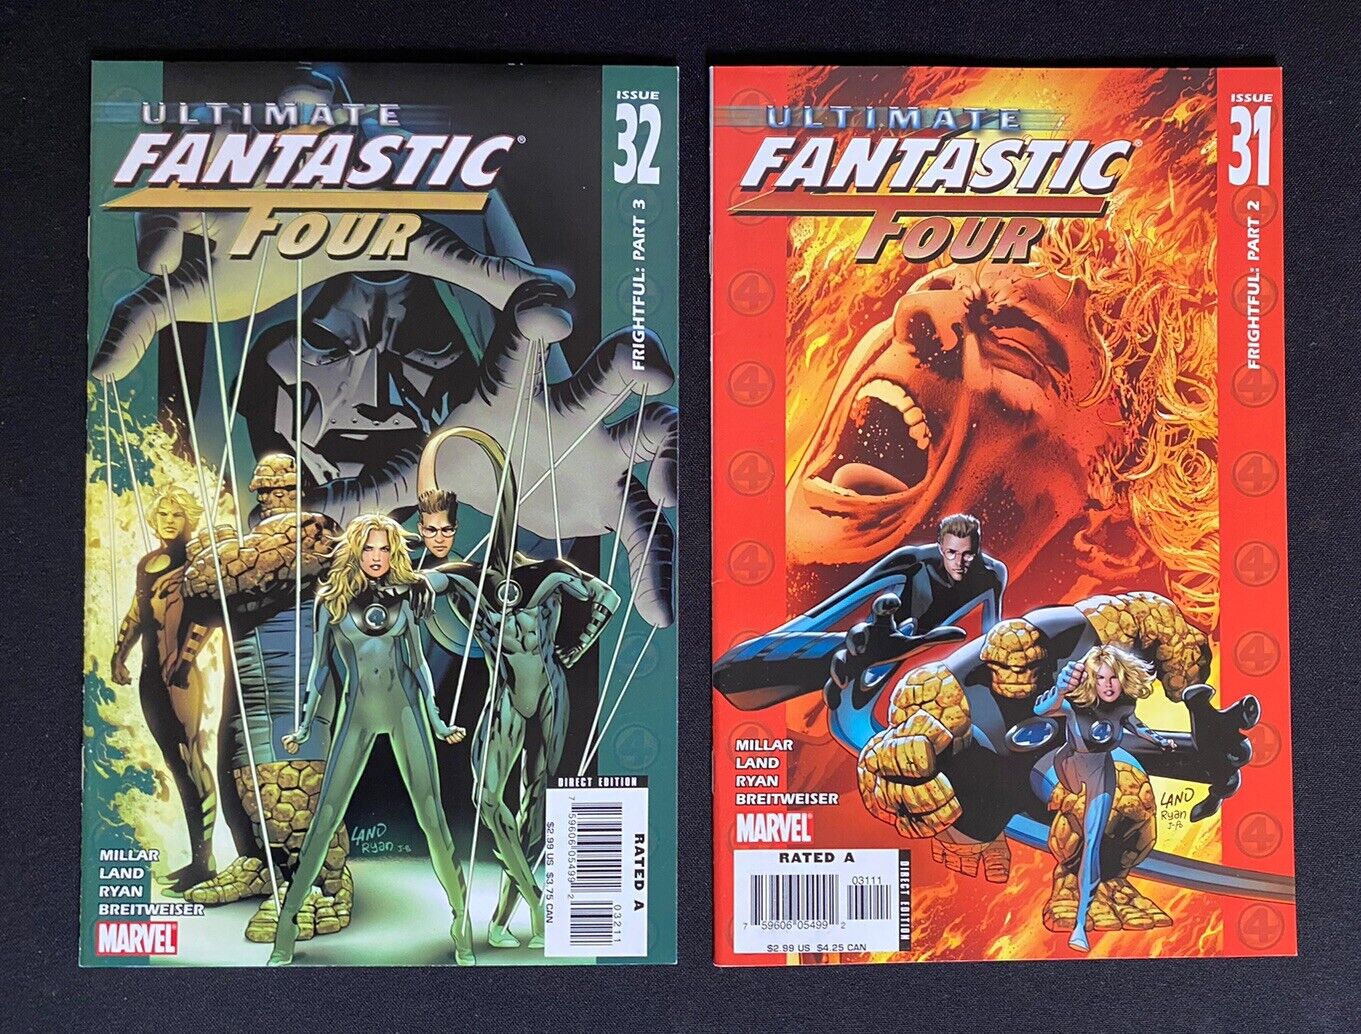 Ultimate Fantastic Four #s 31 and 32 (Marvel Comics 2006)